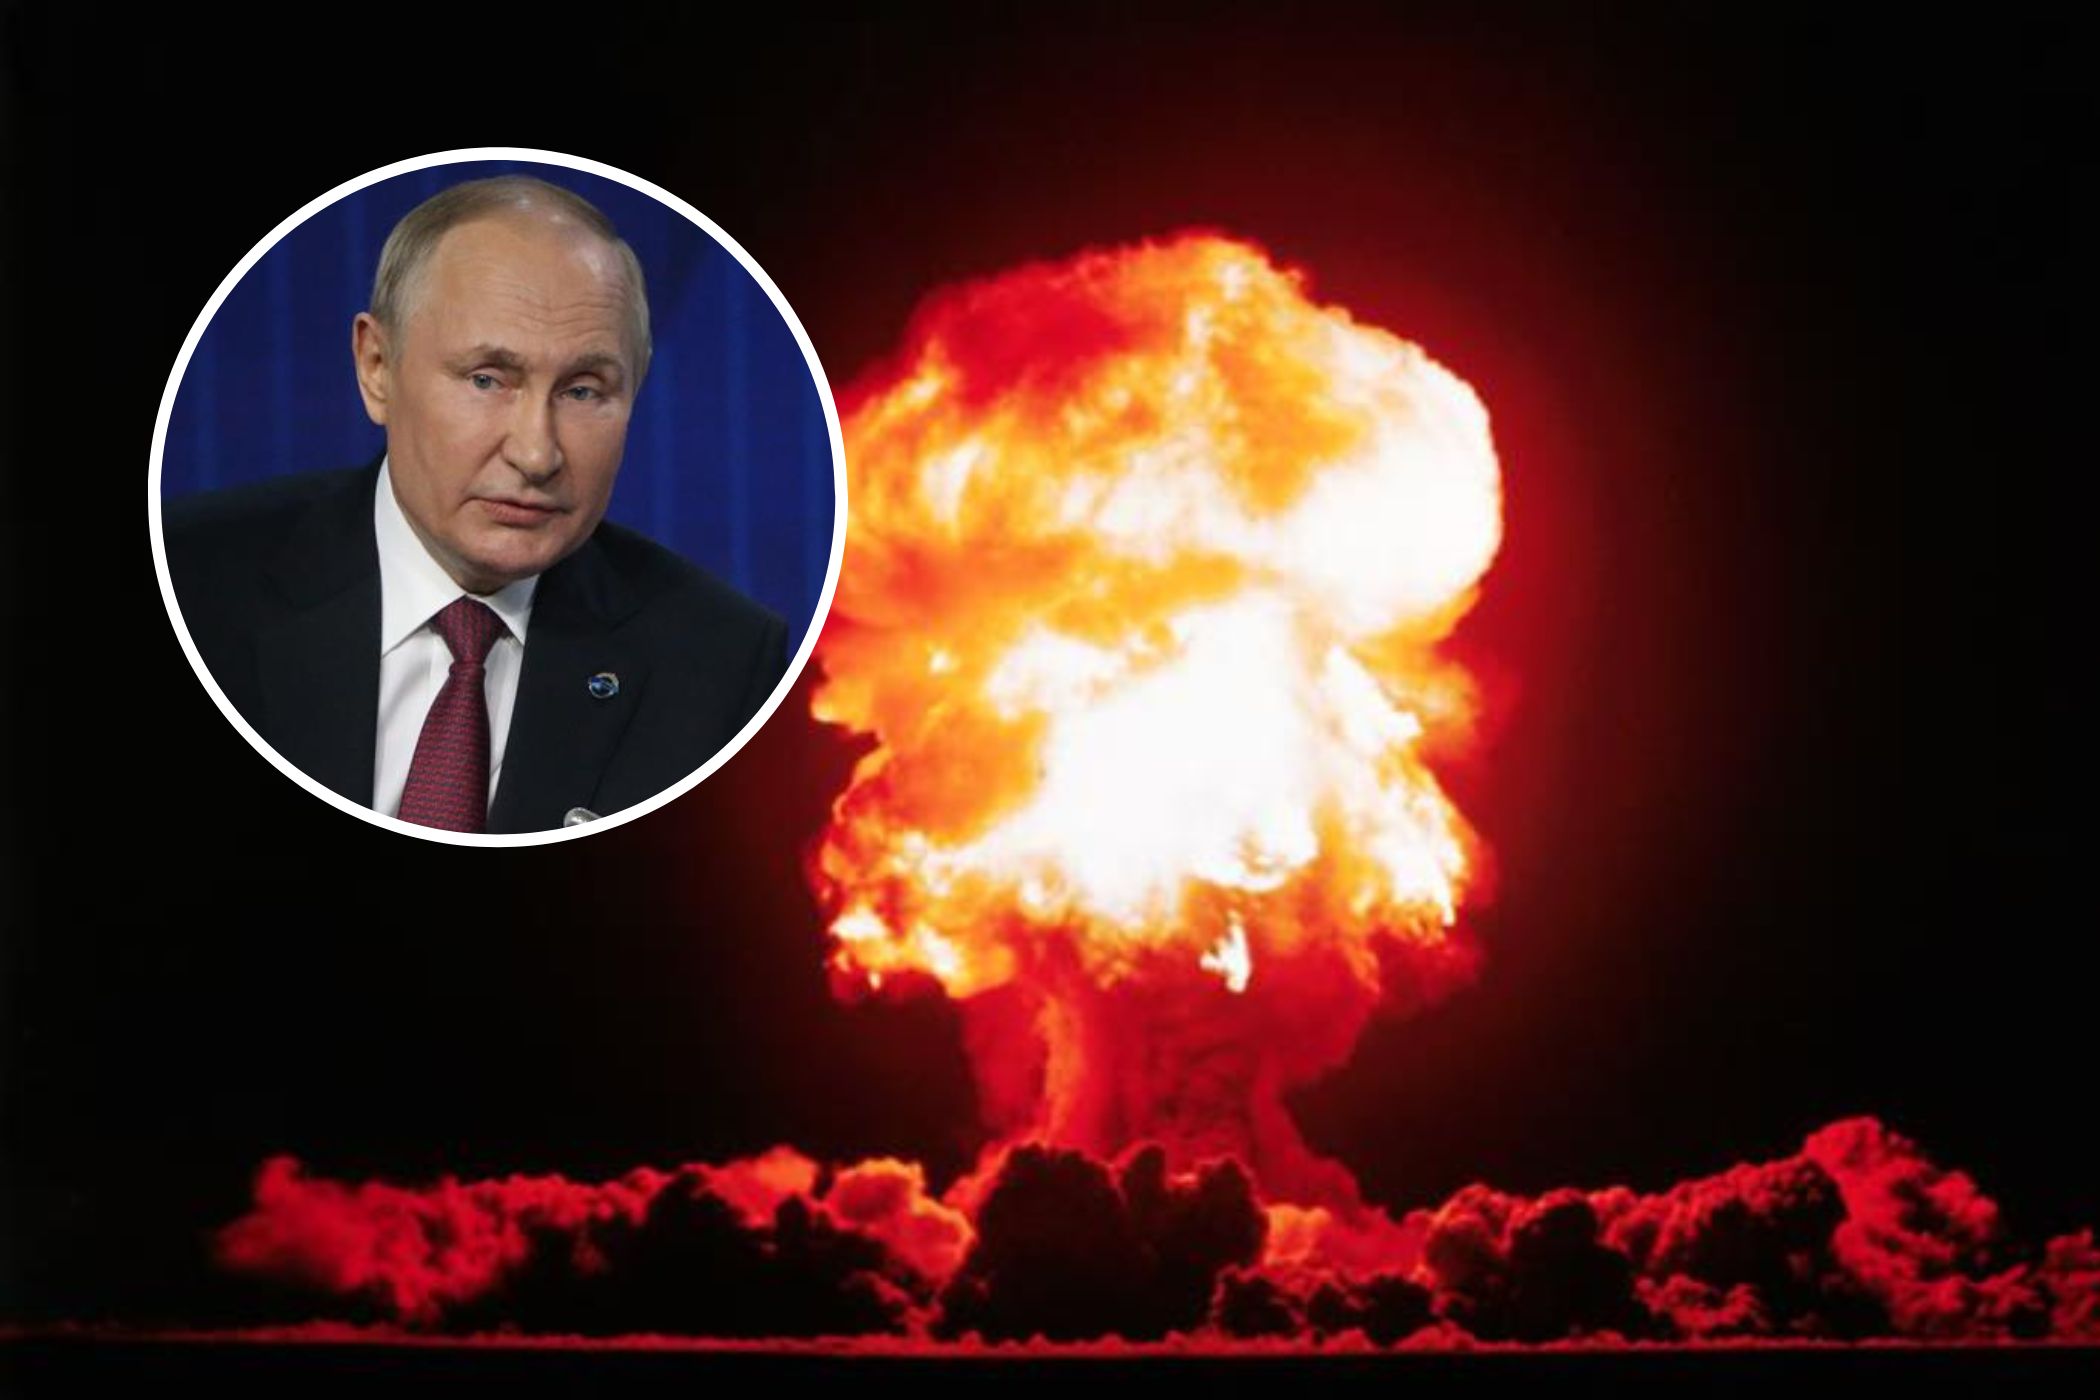 Will Putin Drop a Nuclear Bomb on Ukraine? Here's What Americans Think